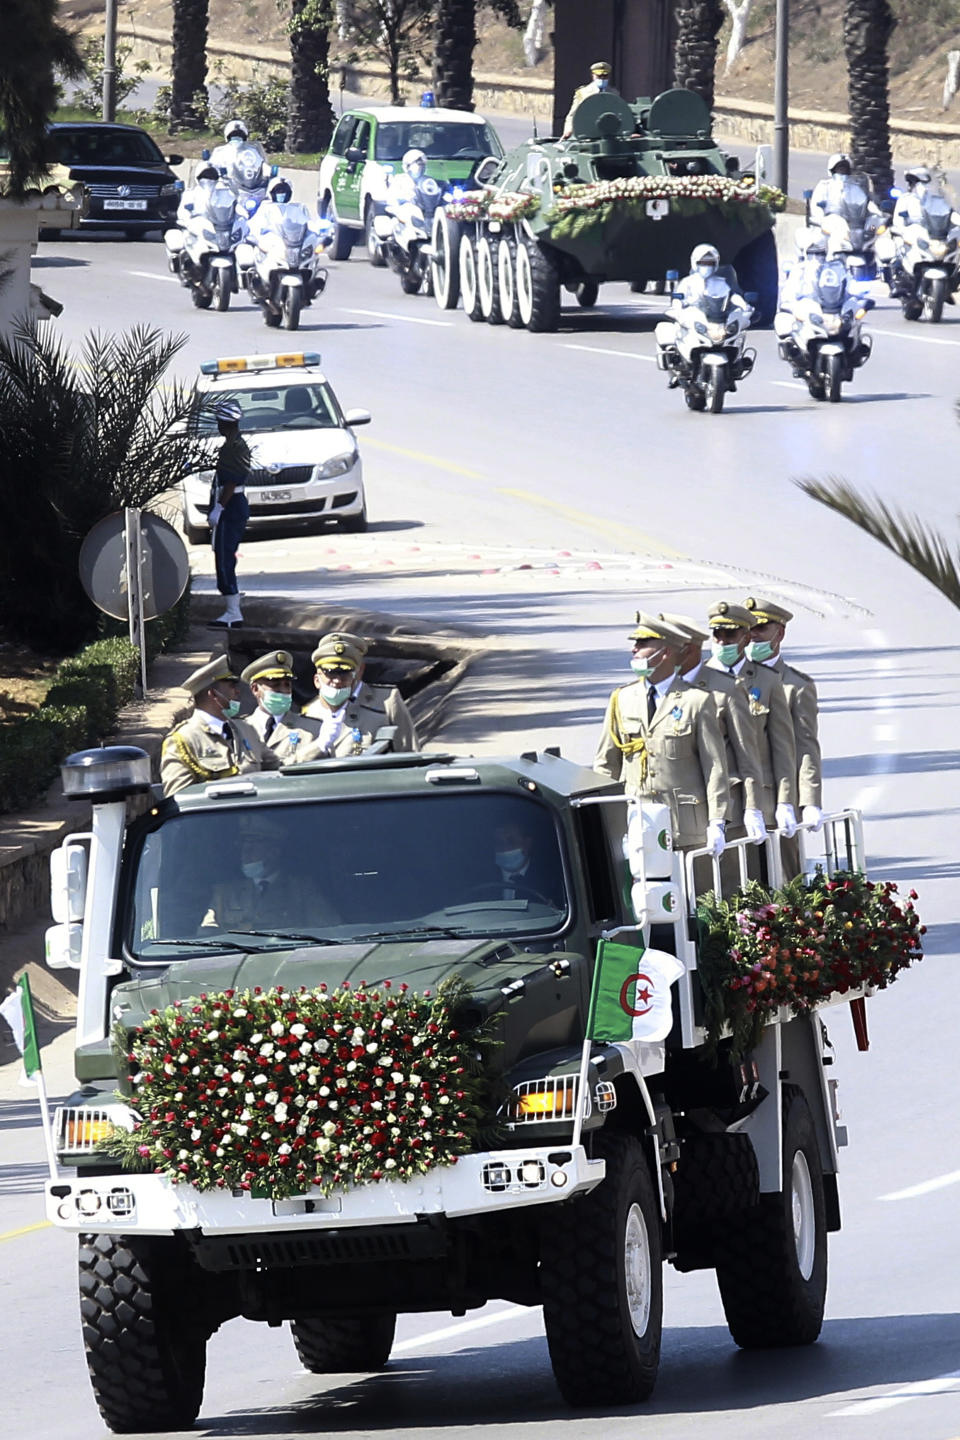 The convoy carrying the coffin of former Algerian President Abdelaziz Bouteflika drives on its way to the El Alia cemetery in Algiers, Sunday, Sept.19, 2021. Algeria's leader declared a three-day period of mourning starting Saturday for former President Abdelaziz Bouteflika, whose 20-year-long rule, riddled with corruption, ended in disgrace as he was pushed from power amid huge street protests when he decided to seek a new term. Bouteflika, who had been ailing since a stroke in 2013, died Friday at 84. (AP Photo/Fateh Guidoum)